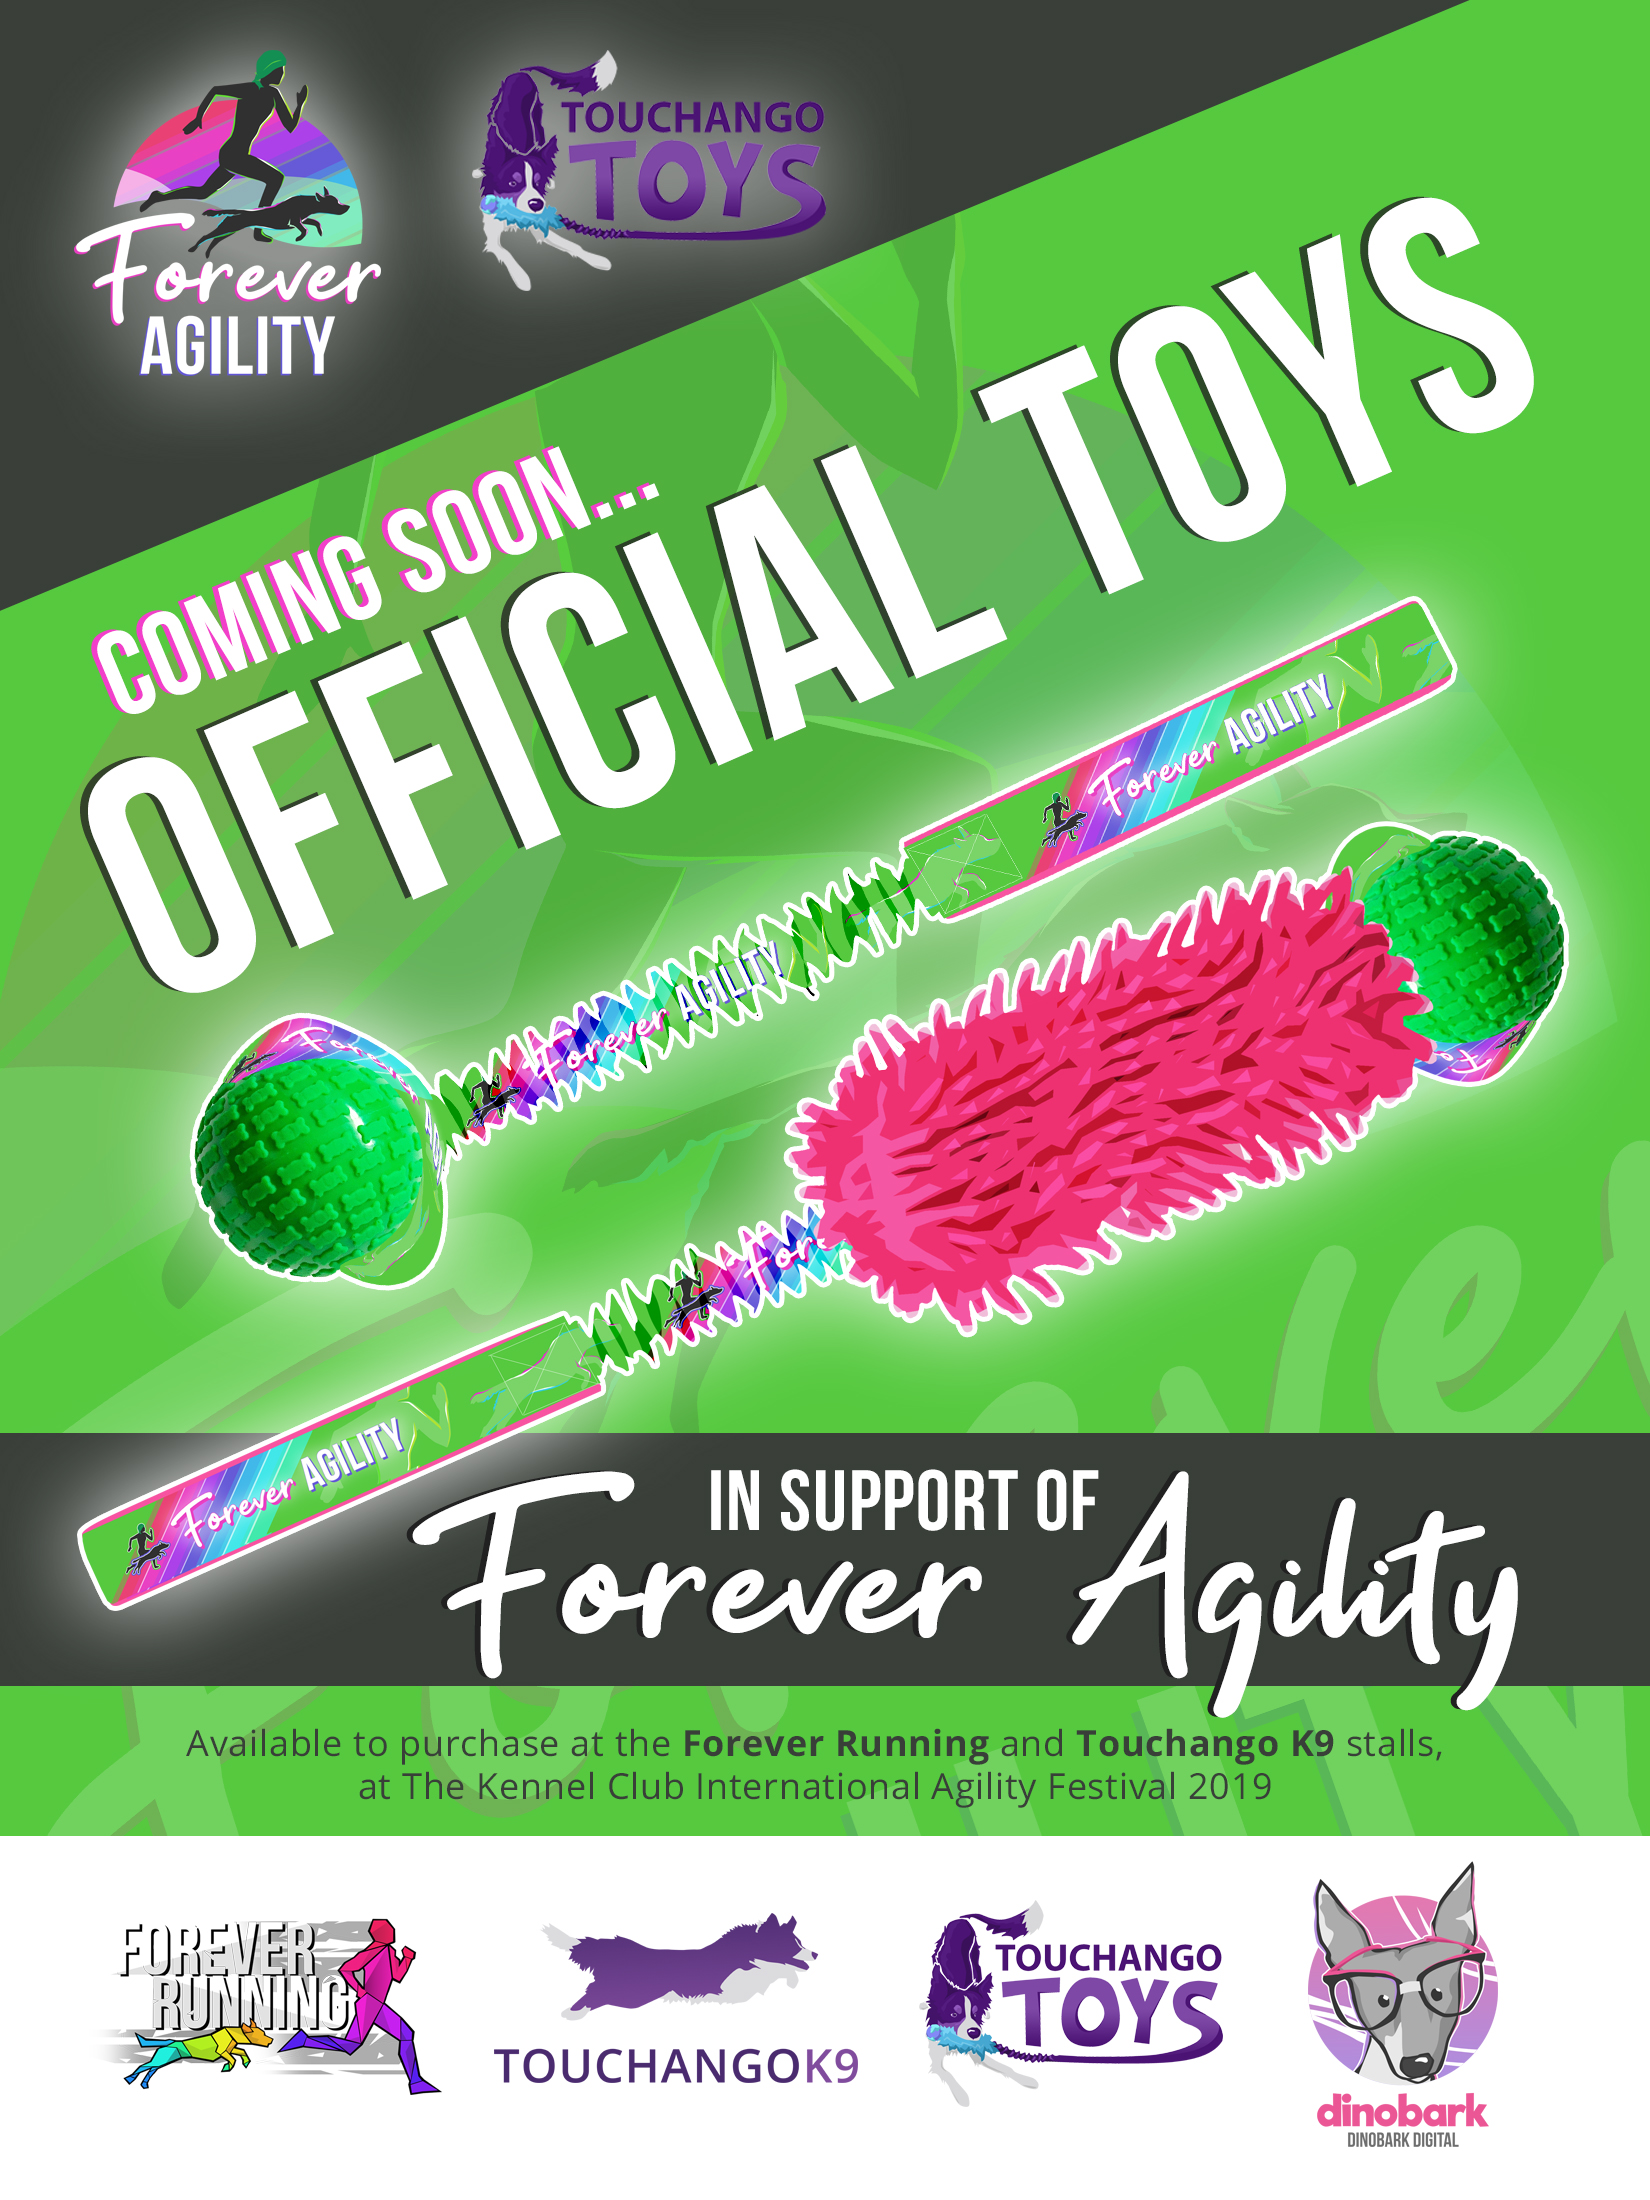 Toys to be launched at KCAIF 2019! Forever Agility